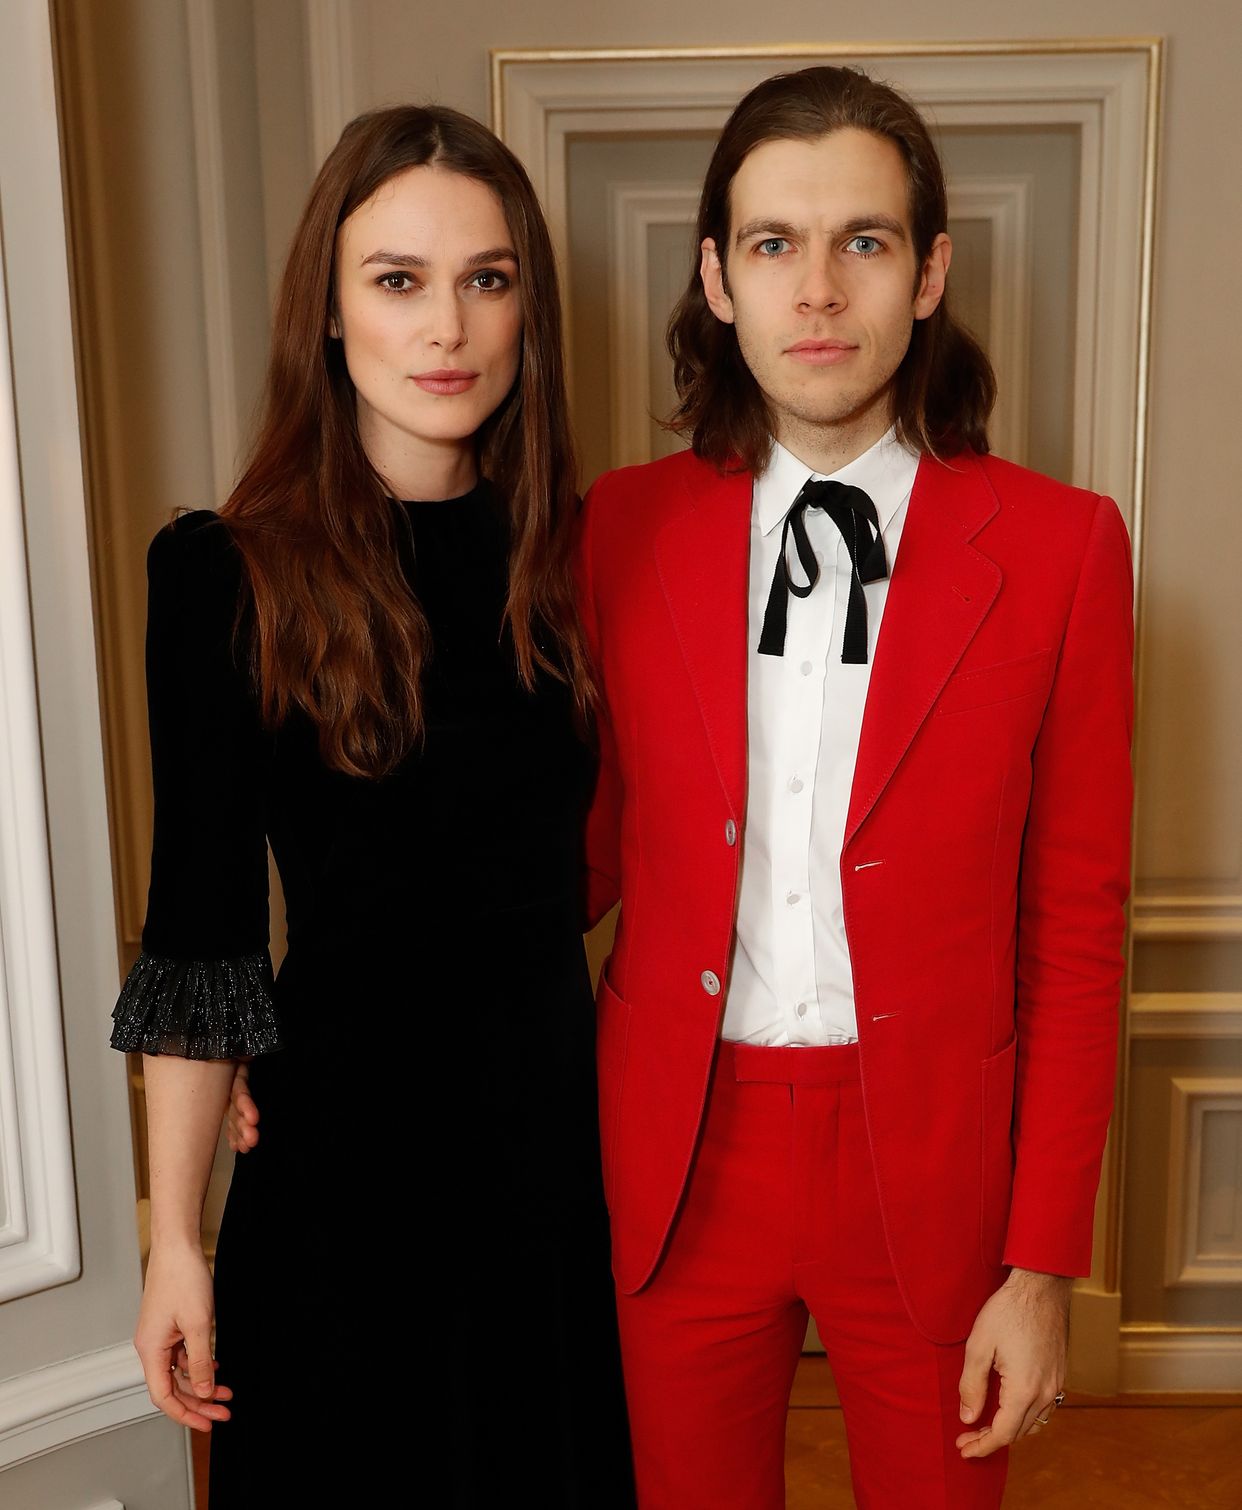 Who In The World Is Keira Knightleys Husband